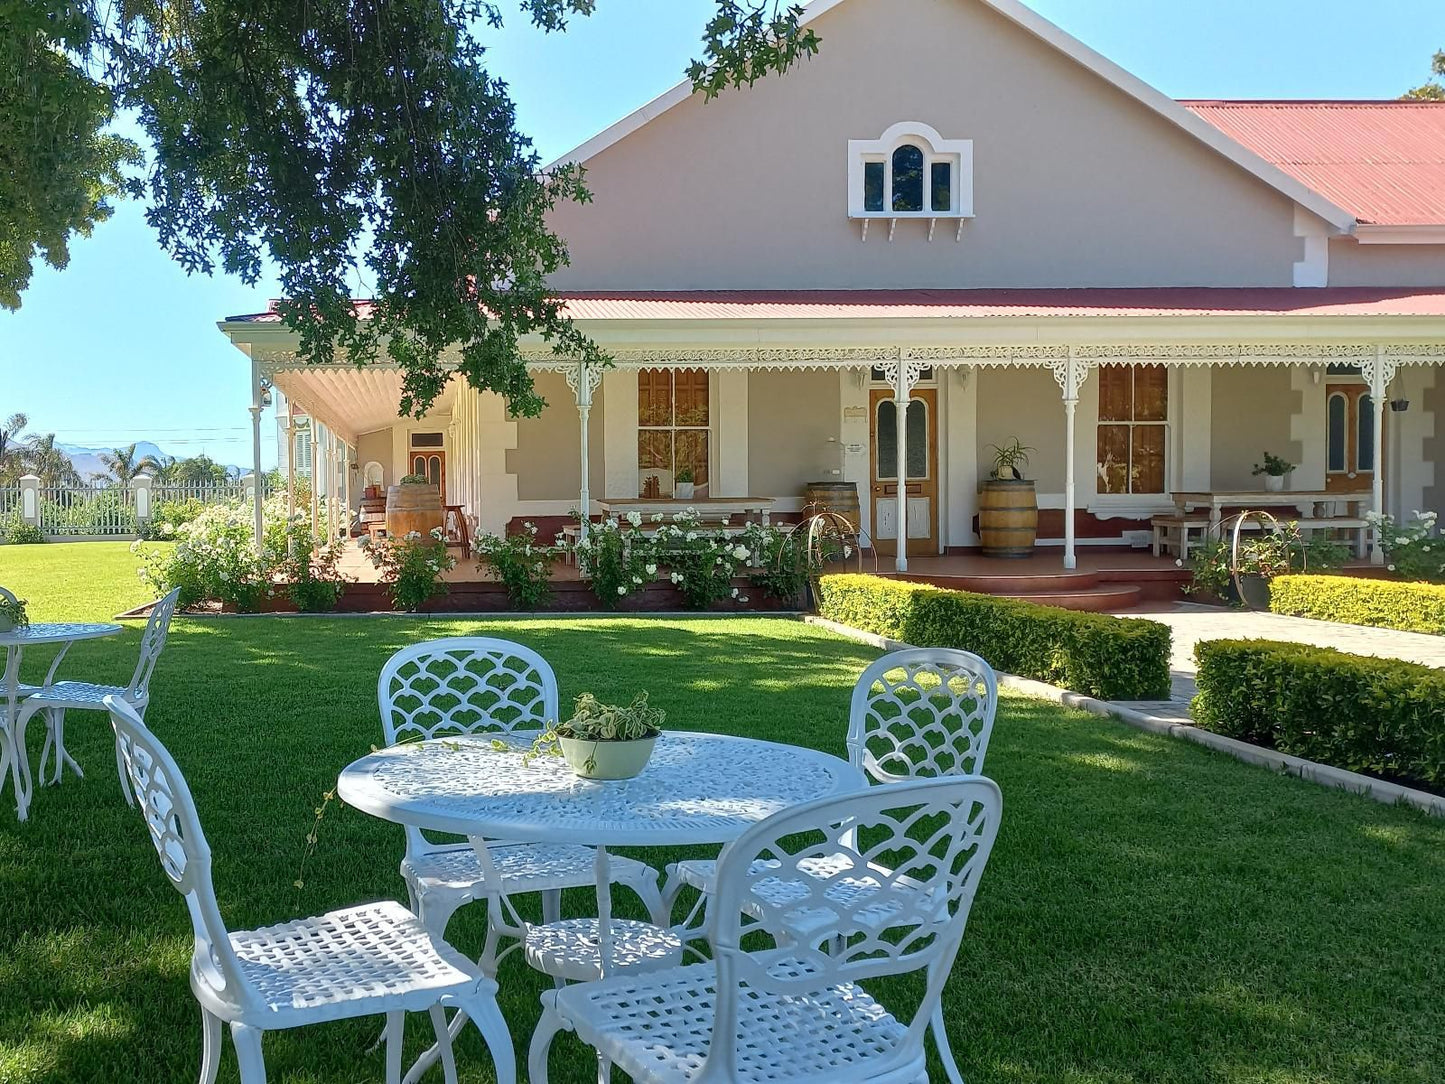 Monte Rosa Guesthouse Rawsonville Western Cape South Africa House, Building, Architecture